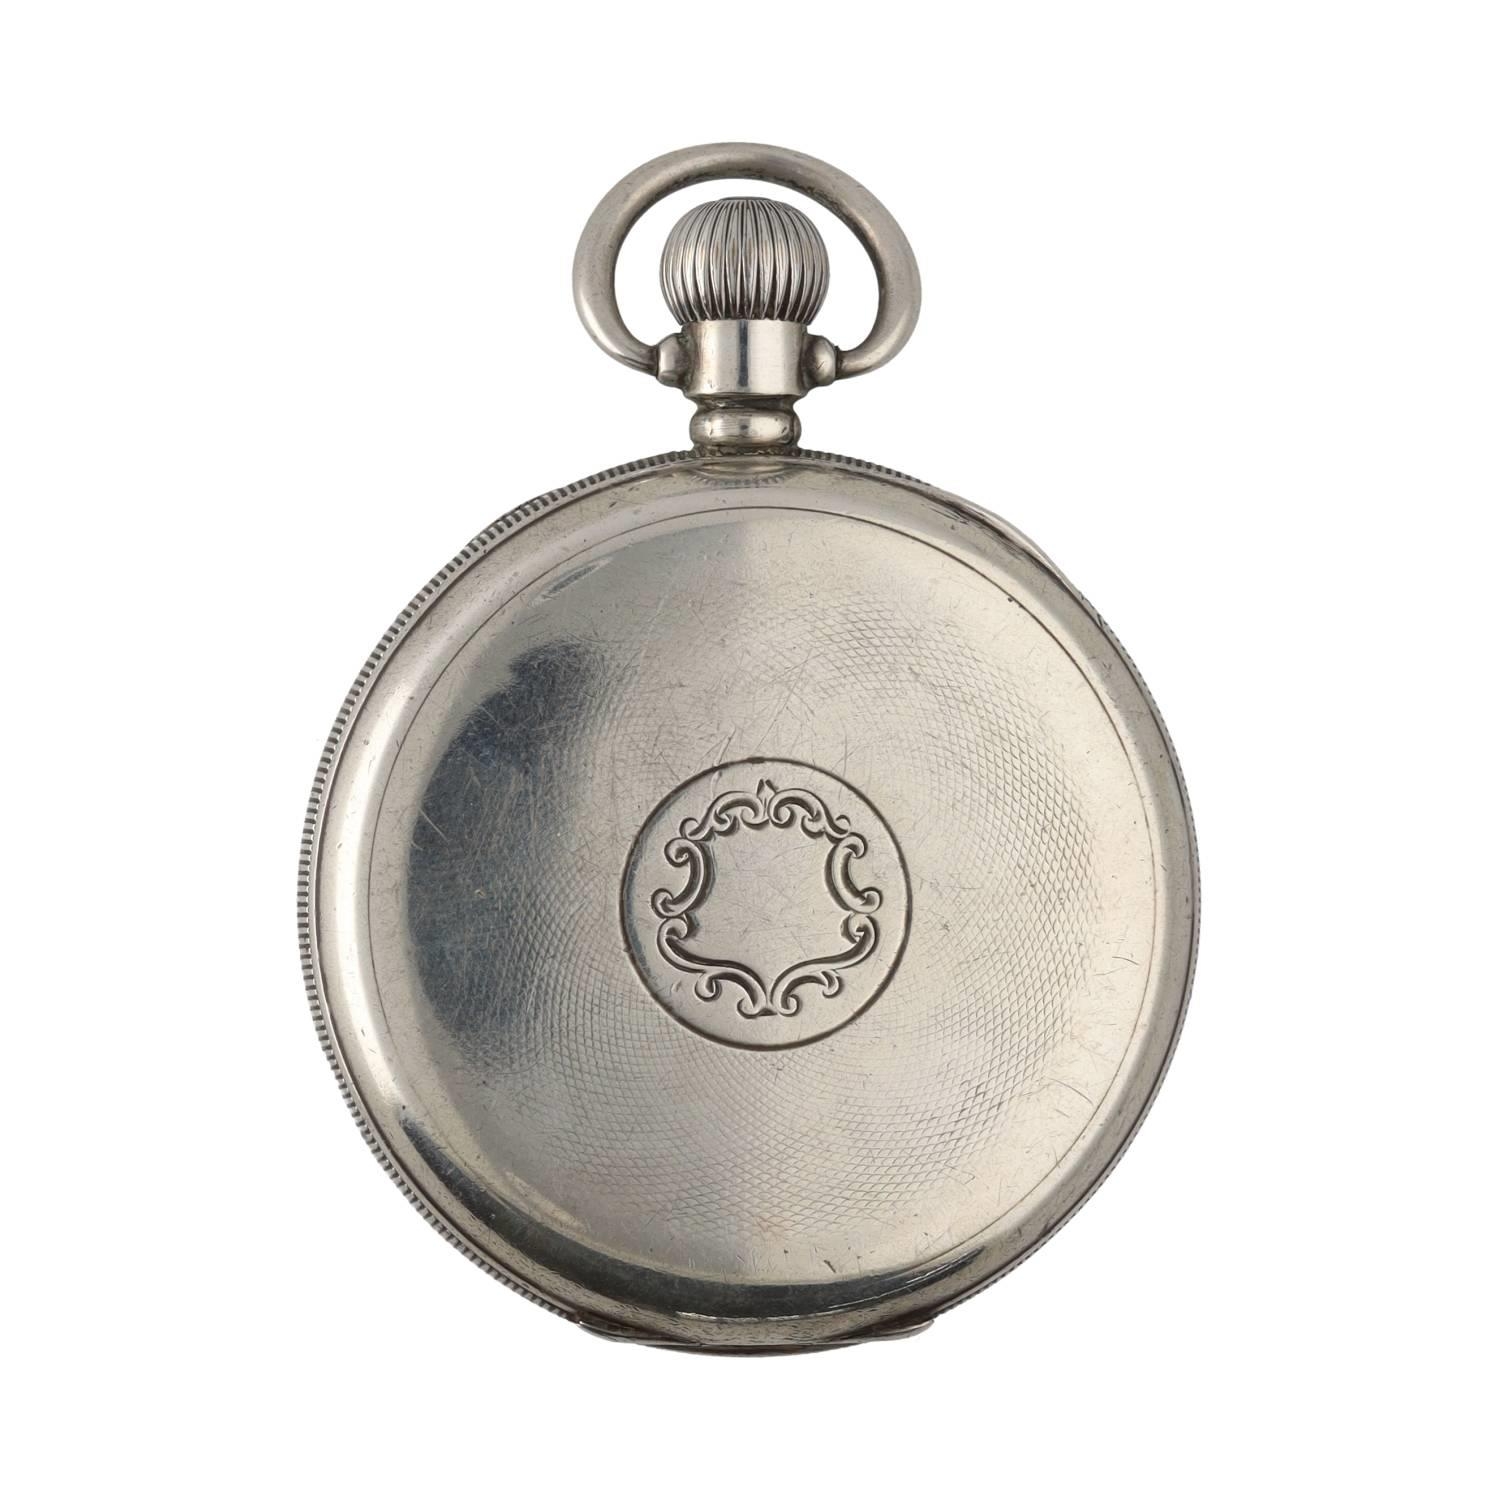 Dimier Freres & Co., Selezi  - silver lever pocket watch, Birmingham 1916, signed movement, hinged - Image 3 of 3